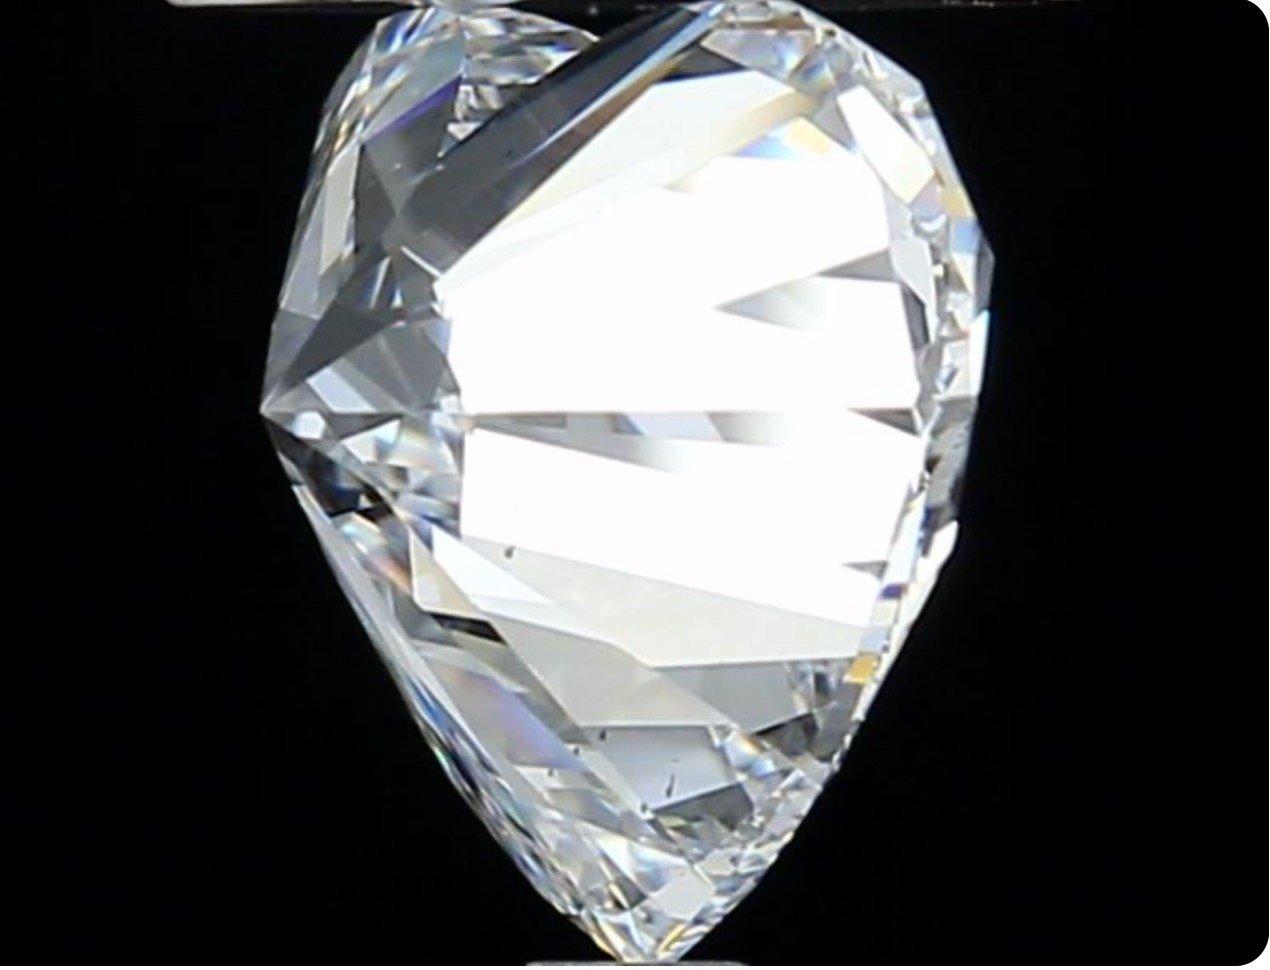 Heart Cut 1 pc Natural Diamond - 4.01 ct - Heart - D (colourless) - VS2- GIA Certificate For Sale